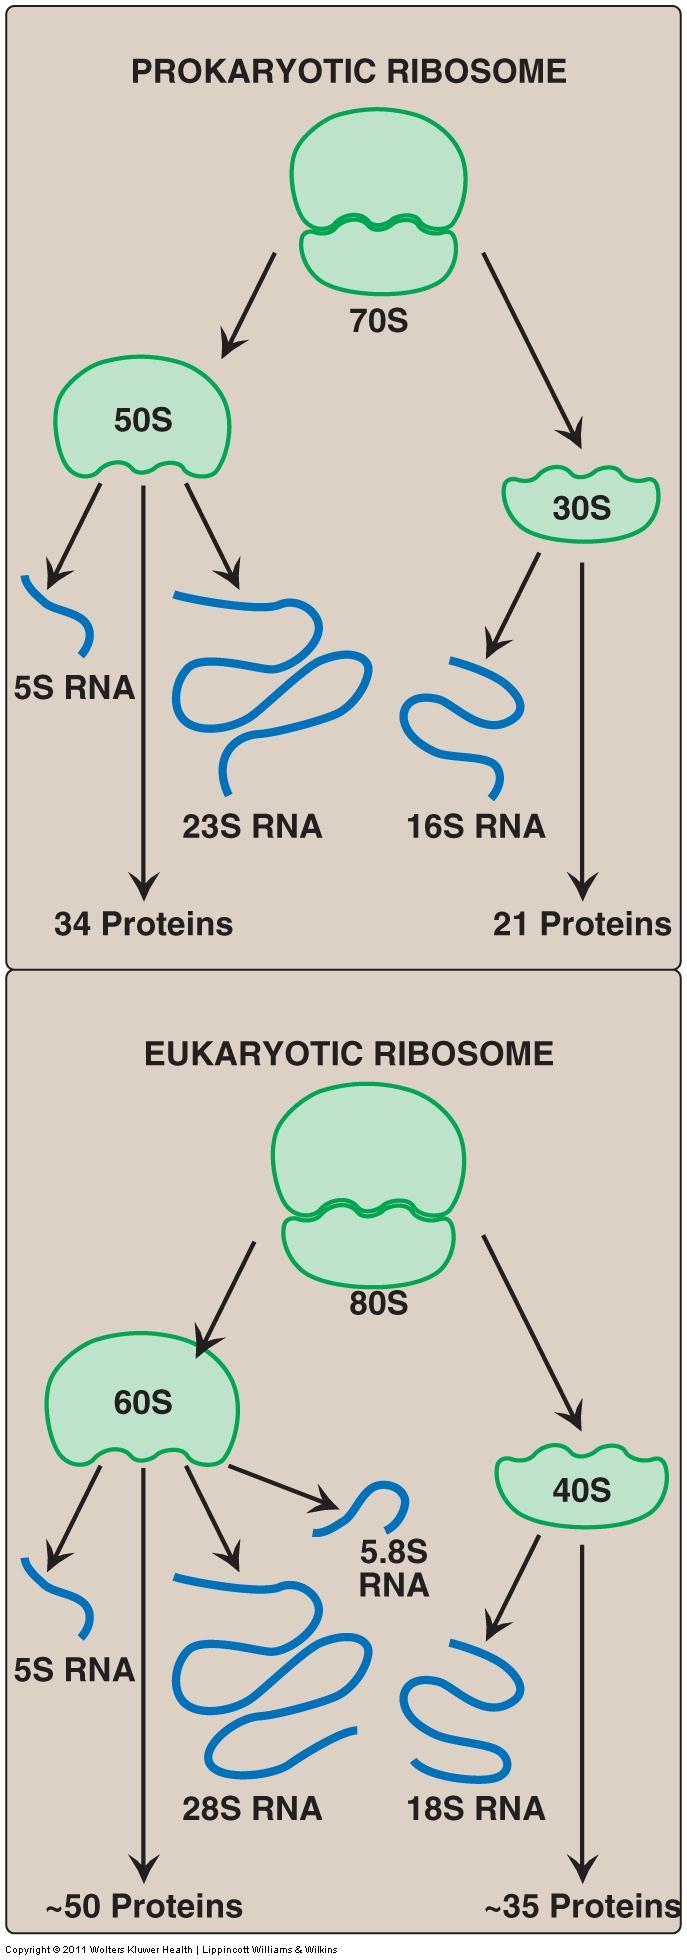 Protein Synthesis III. COMPONENTS REQUIRED FOR TRANSLATION 3. Messenger RNA carries genetic information from the nuclear DNA to the cytosol D.